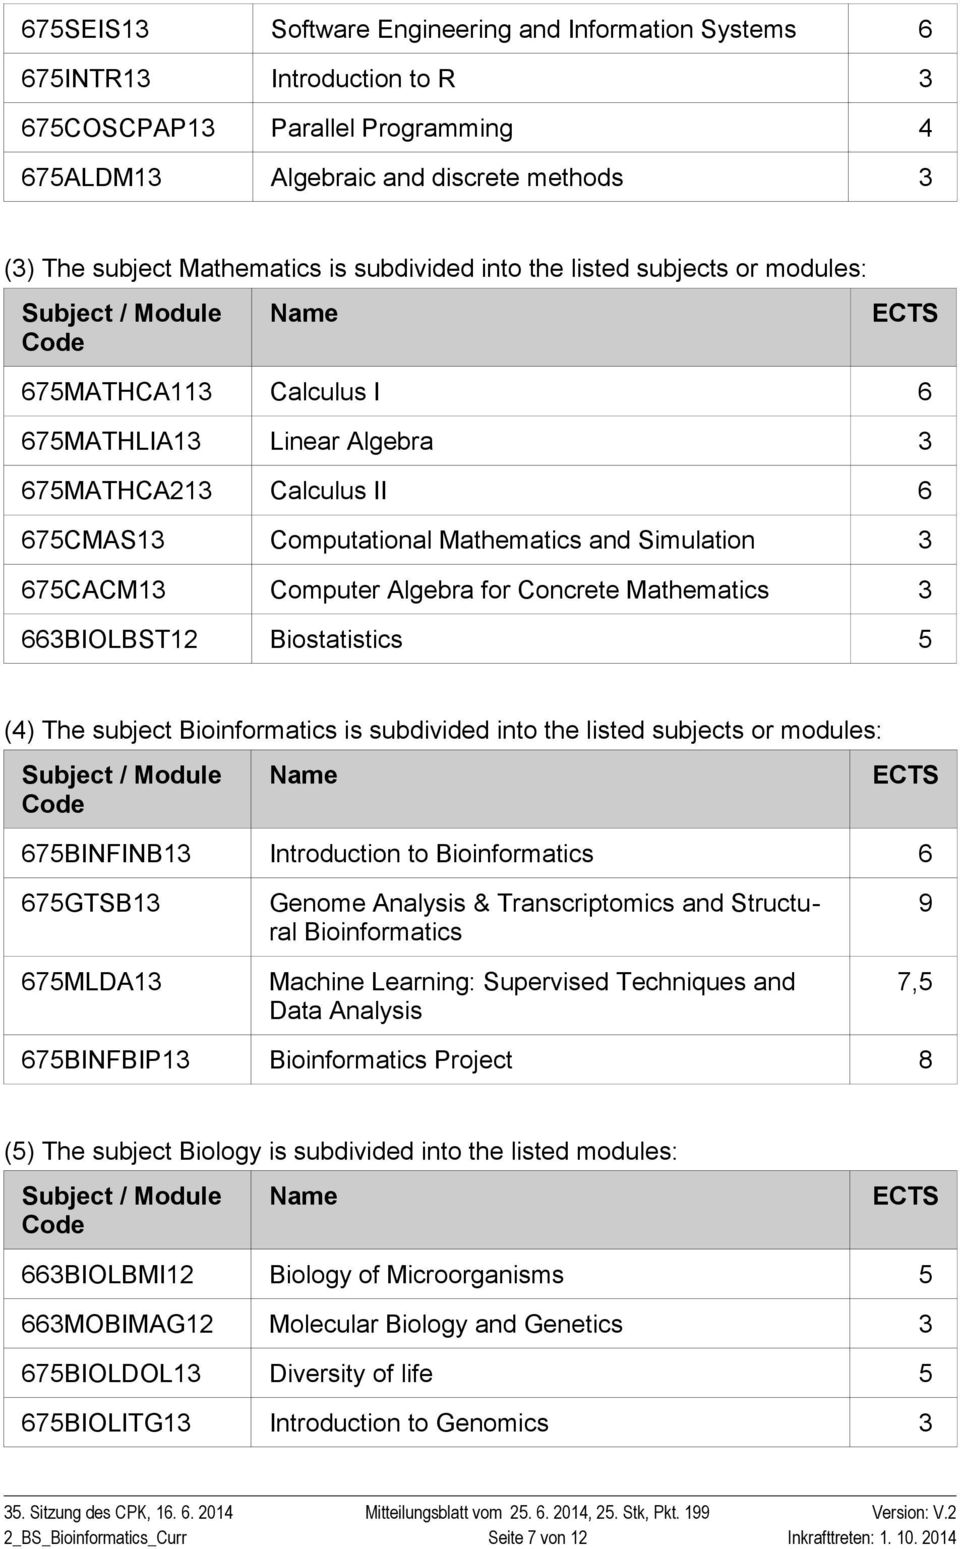 675CACM1 Computer Algebra for Concrete Mathematics 66BIOLBST12 Biostatistics 5 (4) The subject Bioinformatics is subdivided into the listed subjects or modules: Subject / Module Code Name 675BINFINB1